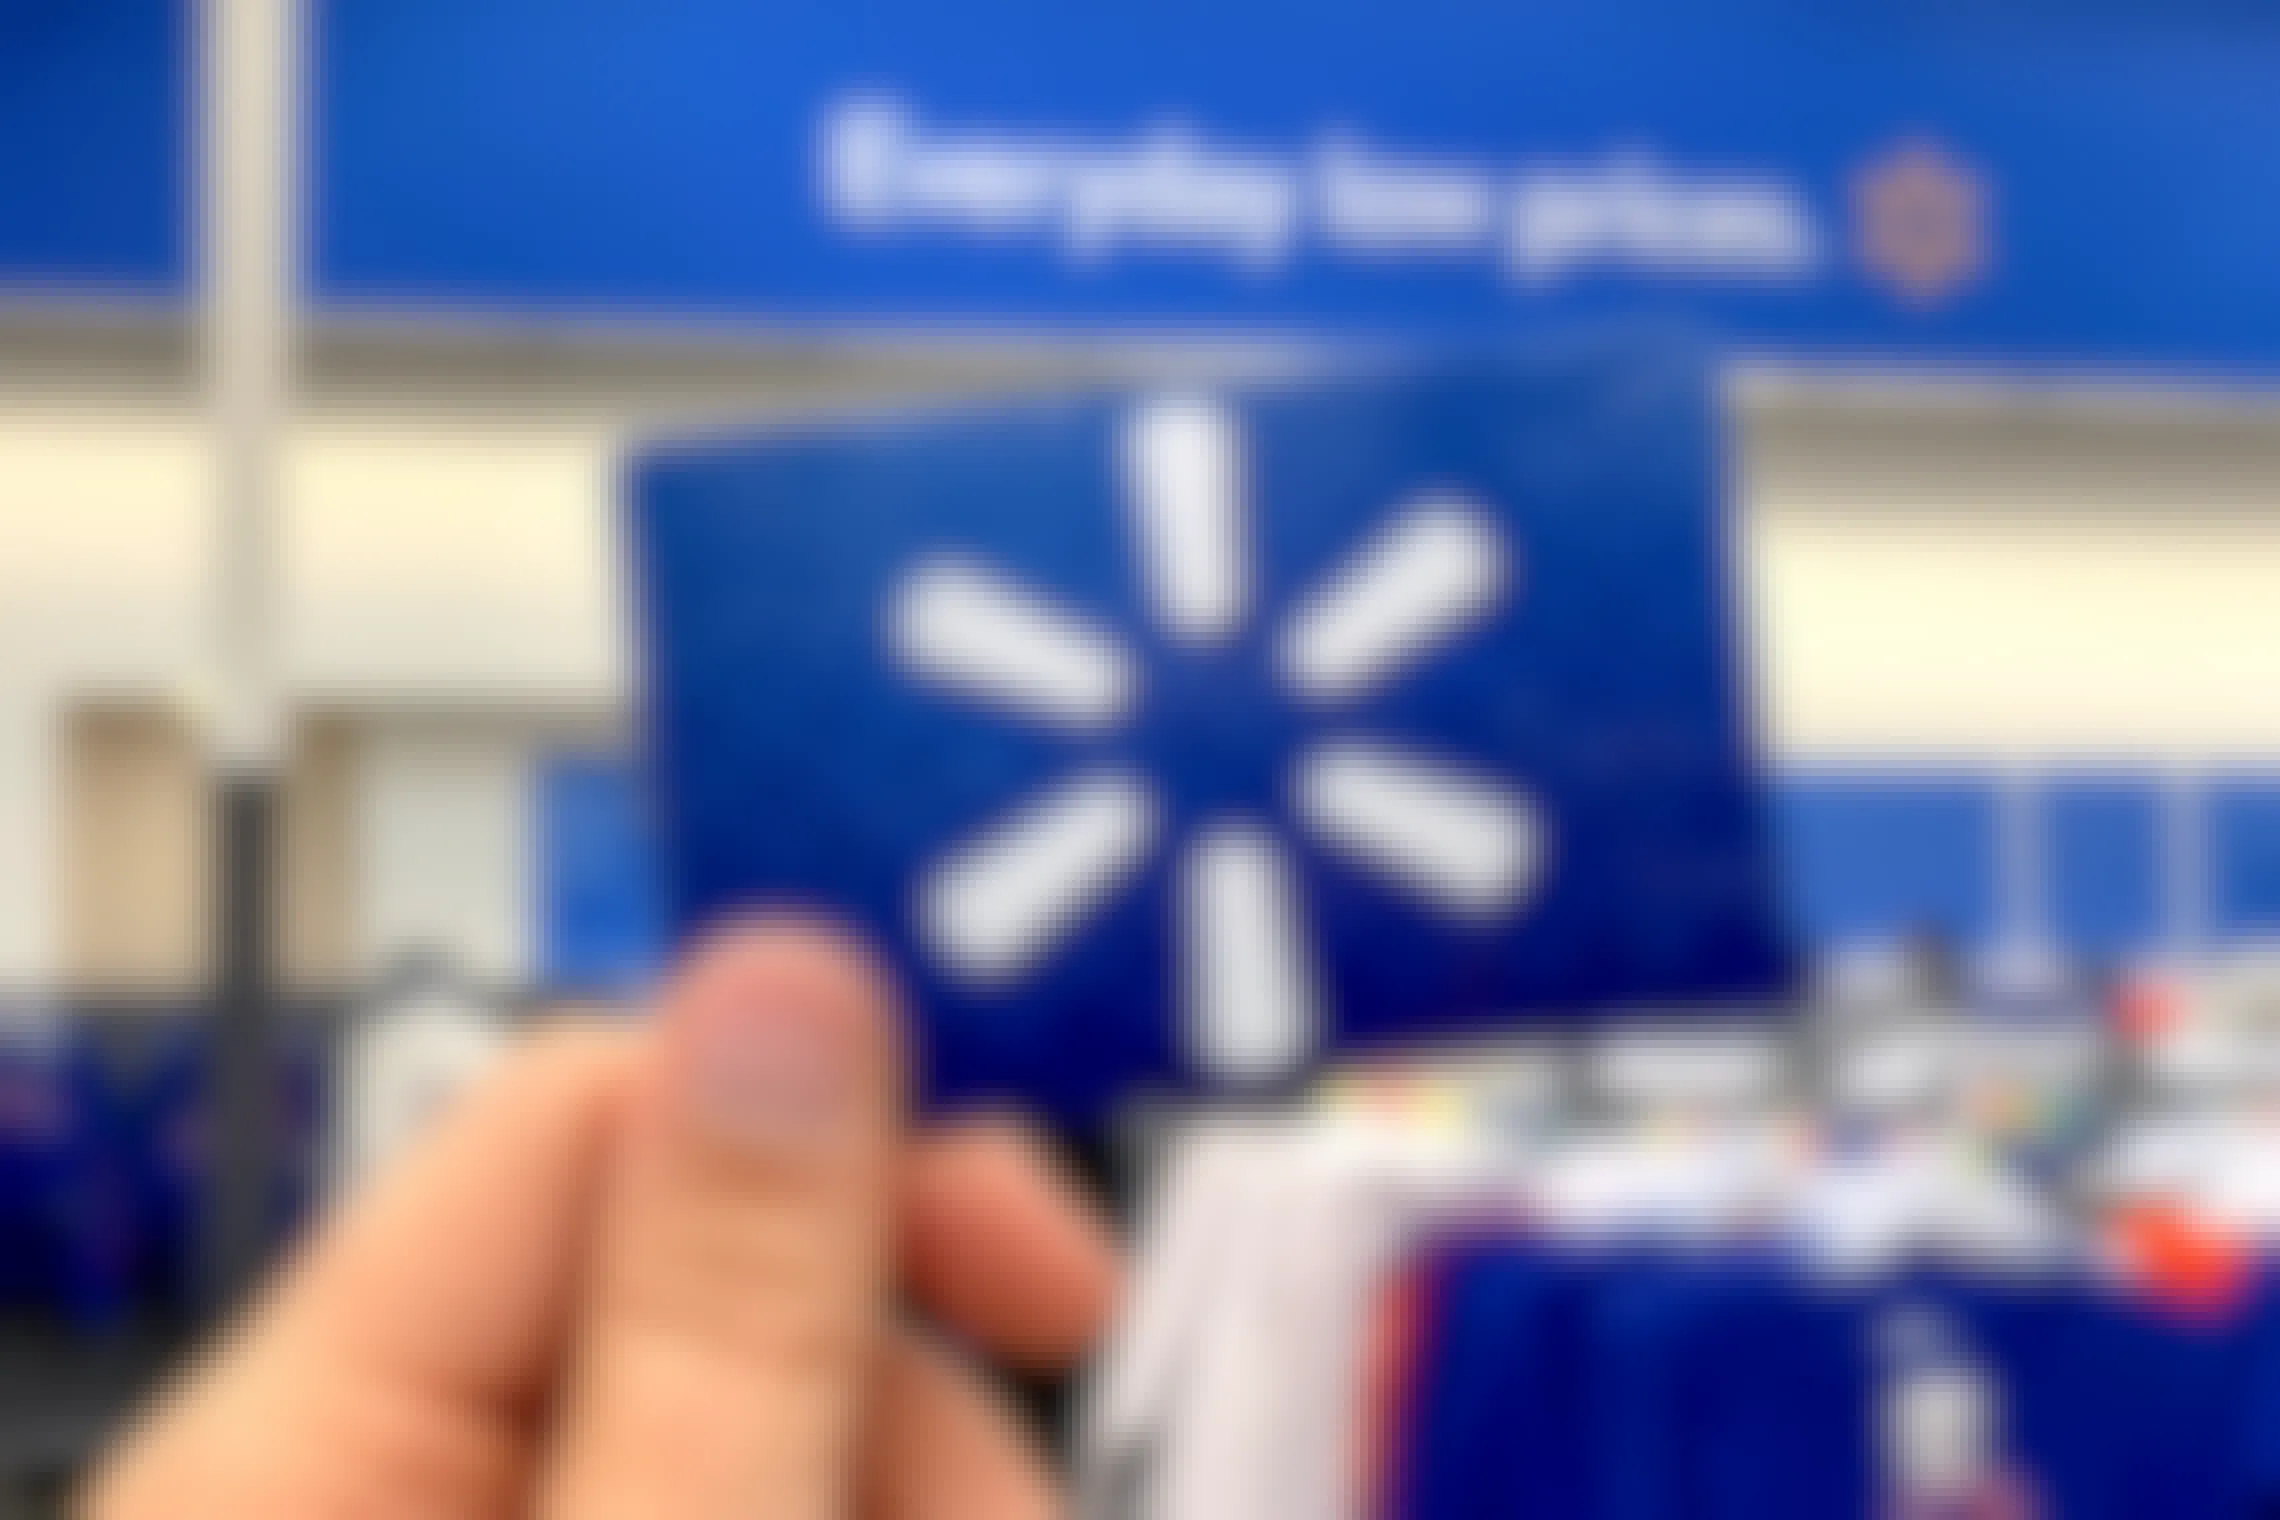 Walmart gift card held up in store with Walmart logo in background